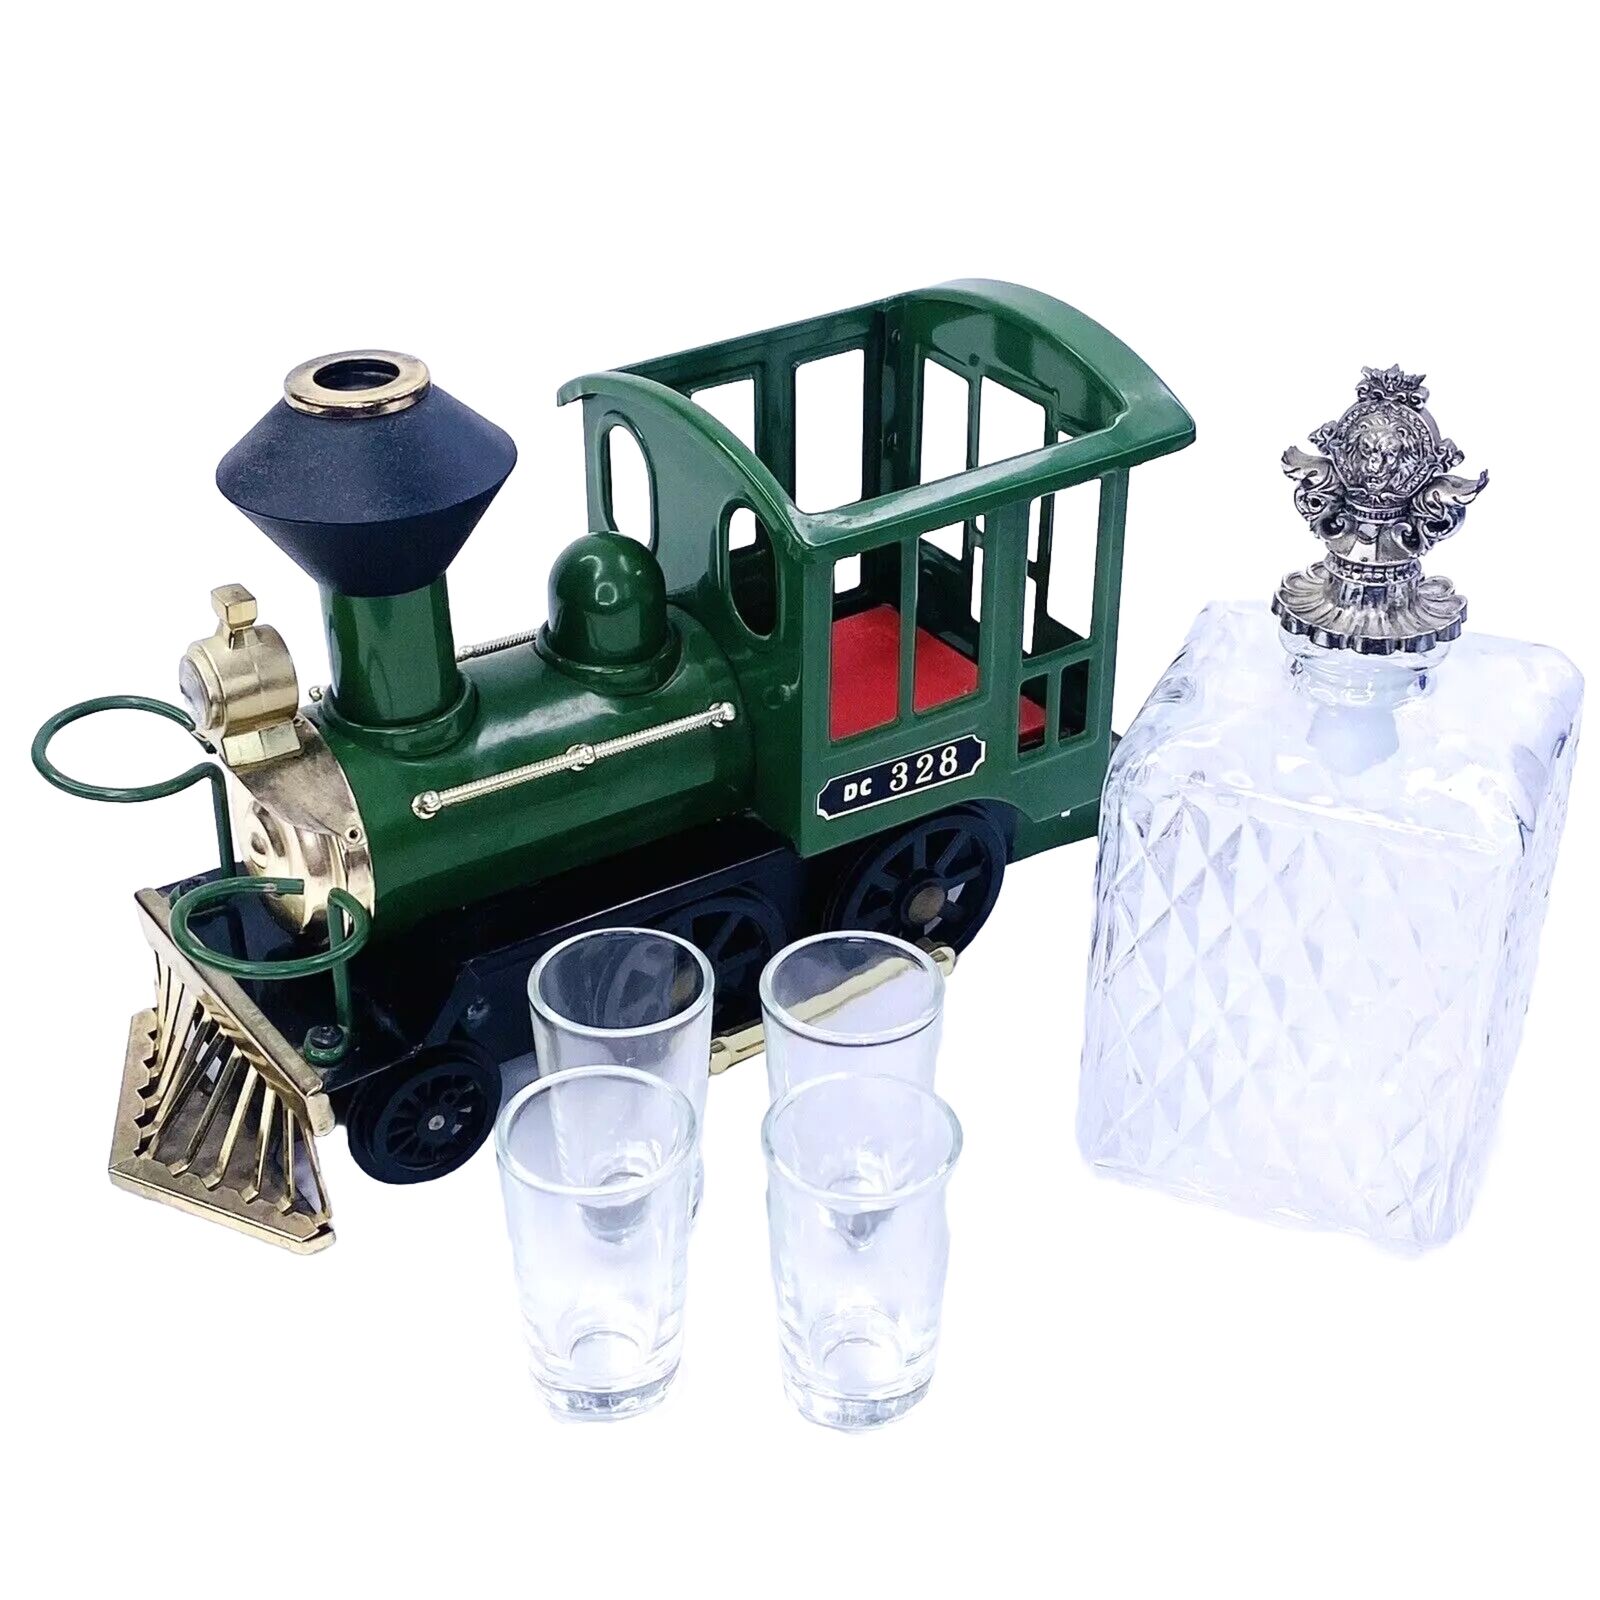 VINTAGE DC328 Green Train Locomotive Music Box Decanter With 4 Glasses Working